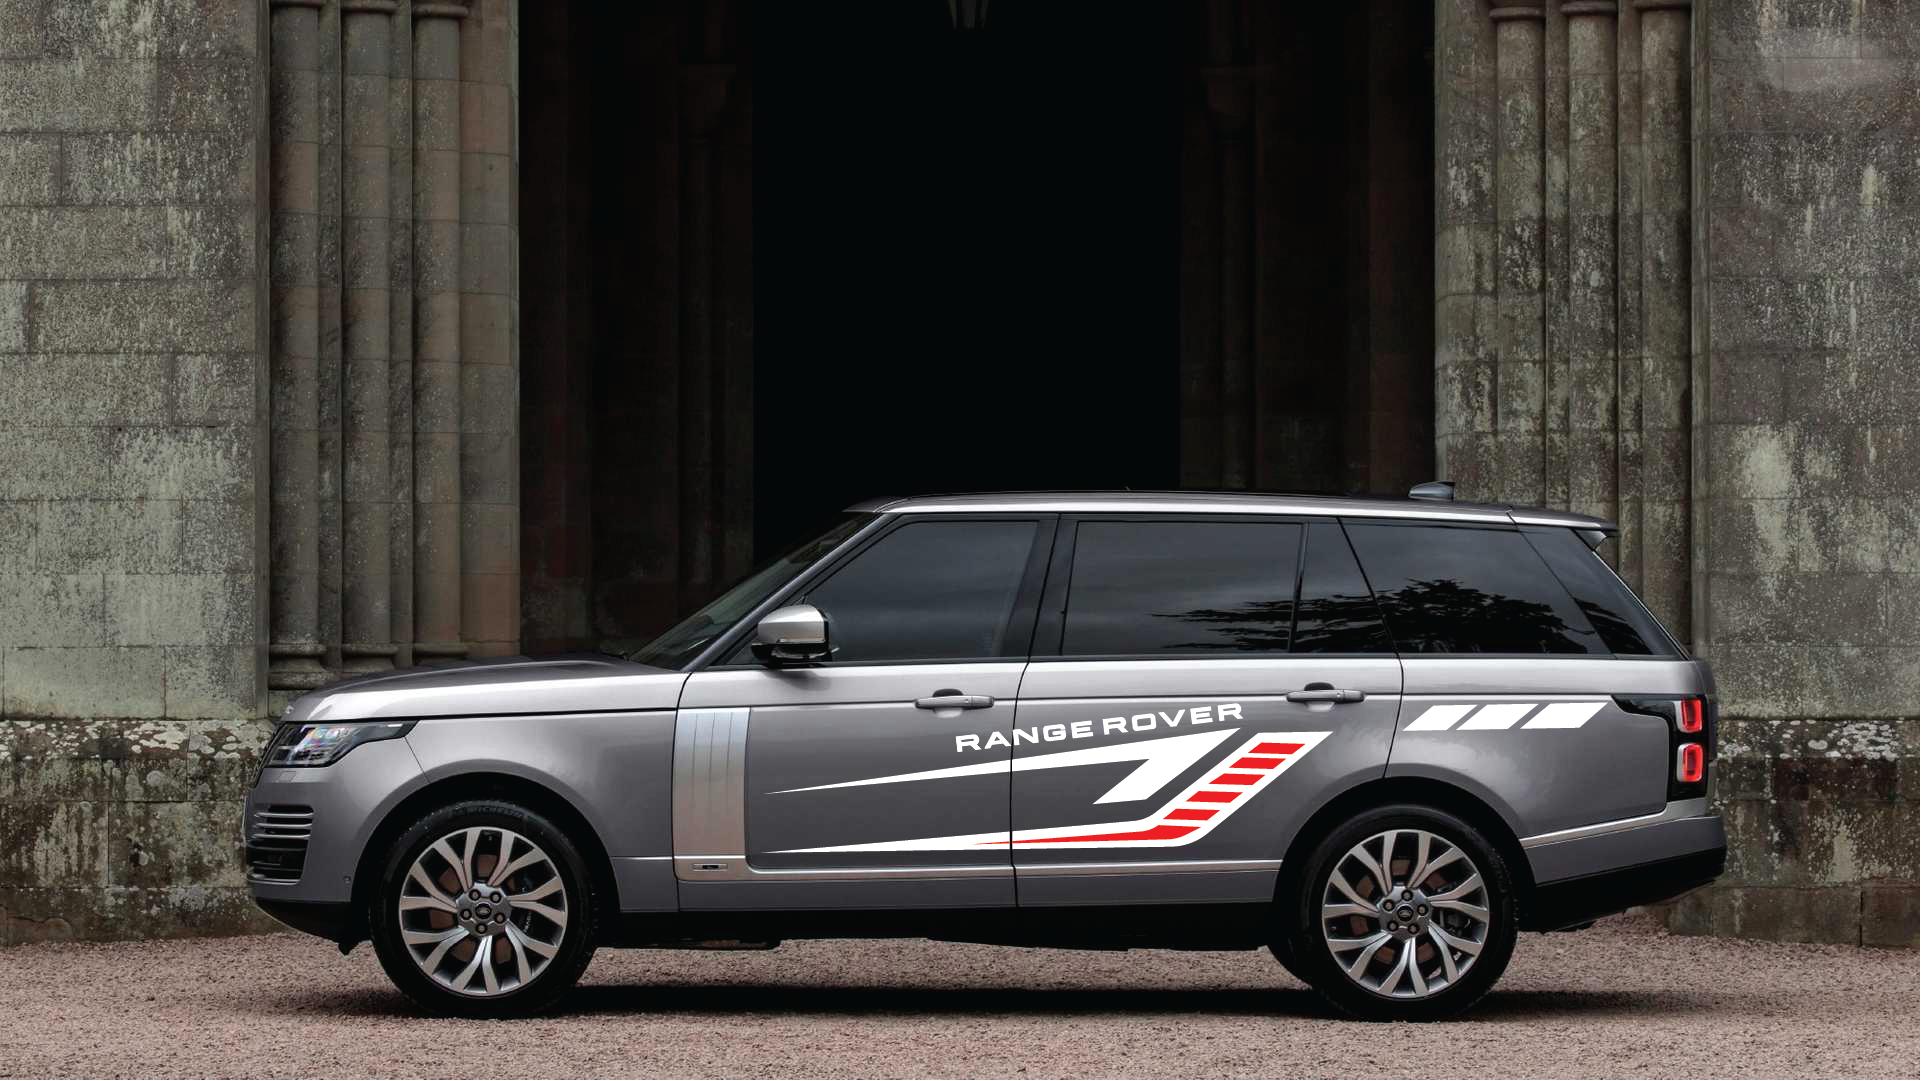 2014 Land Rover Range Rover Sport Ratings Pricing Reviews and Awards   JD Power